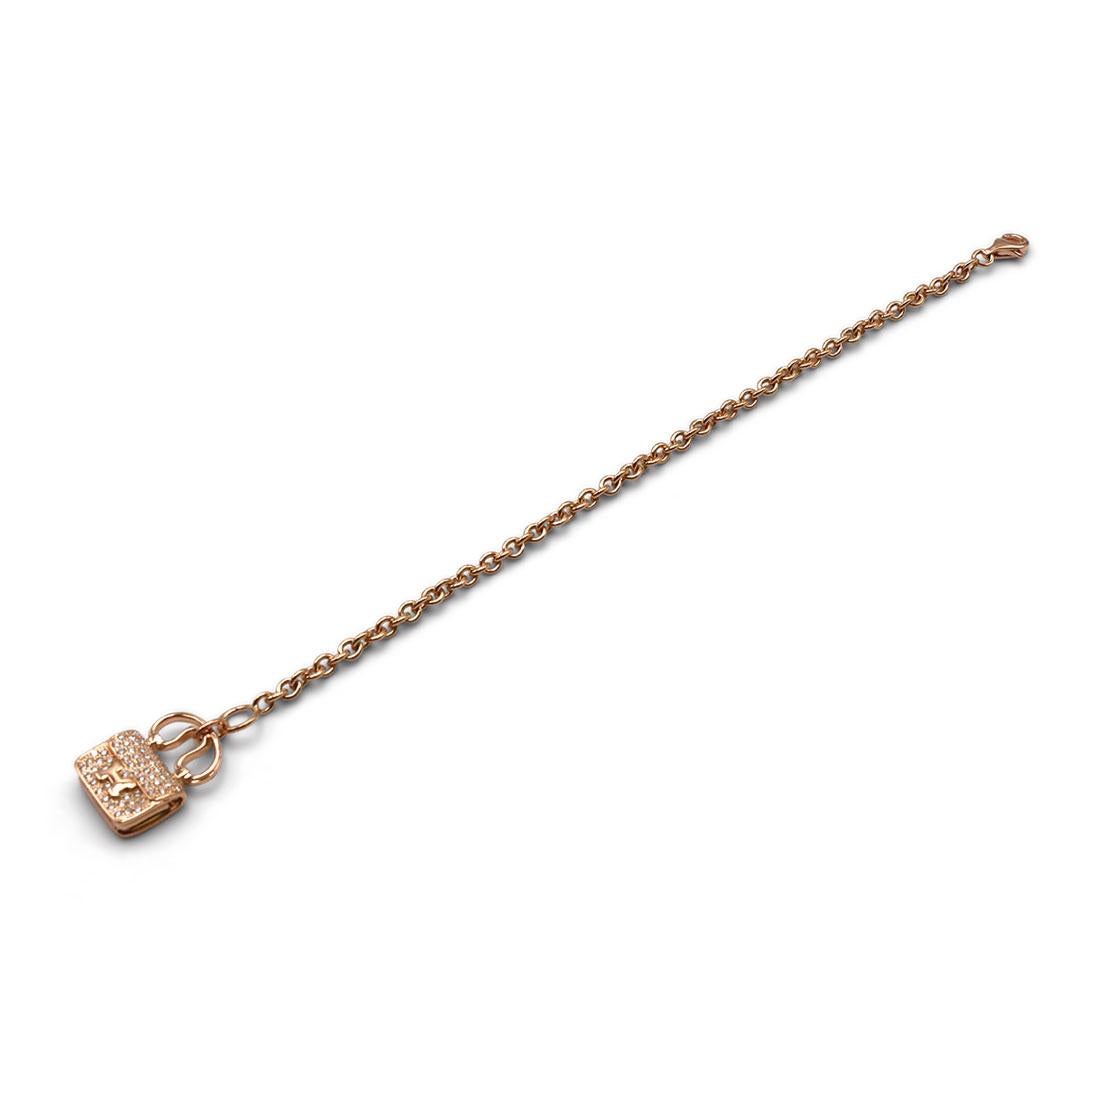 Authentic Hermès Constance Amulette bracelet crafted in 18 karat rose gold. The bracelet features a charm designed as an Hermès Constance handbag set with round brilliant cut diamonds carrying an estimated .58 total carat weight. Signed Hermes,